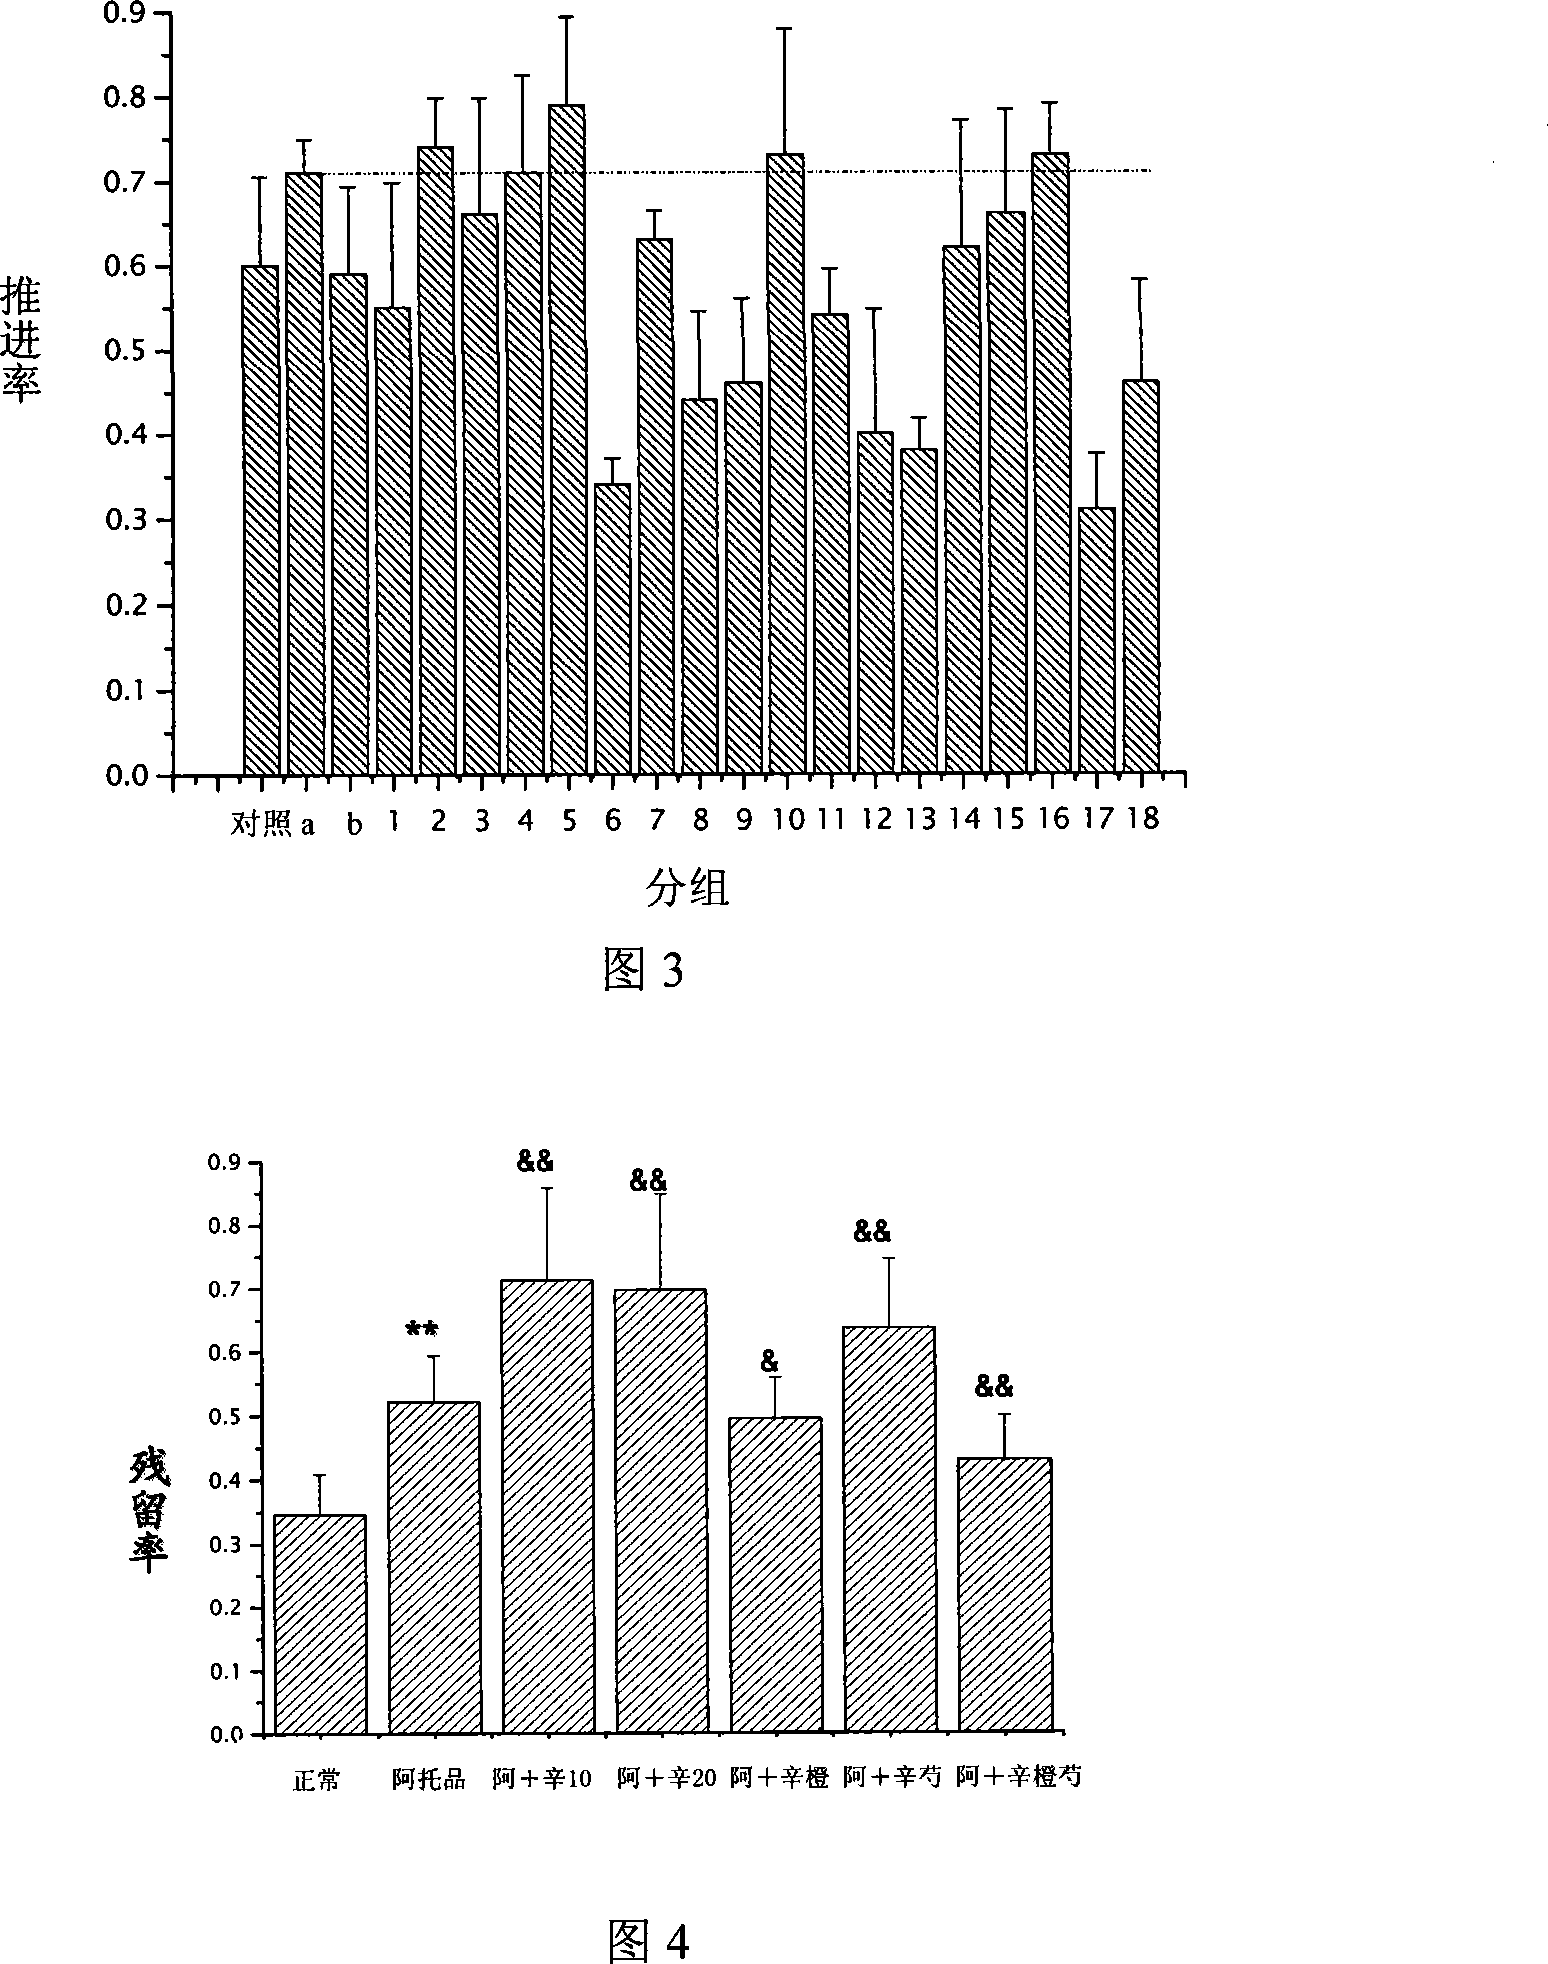 Composition capable of bidirectional adjusting gastrointestinal smooth muscle contraction